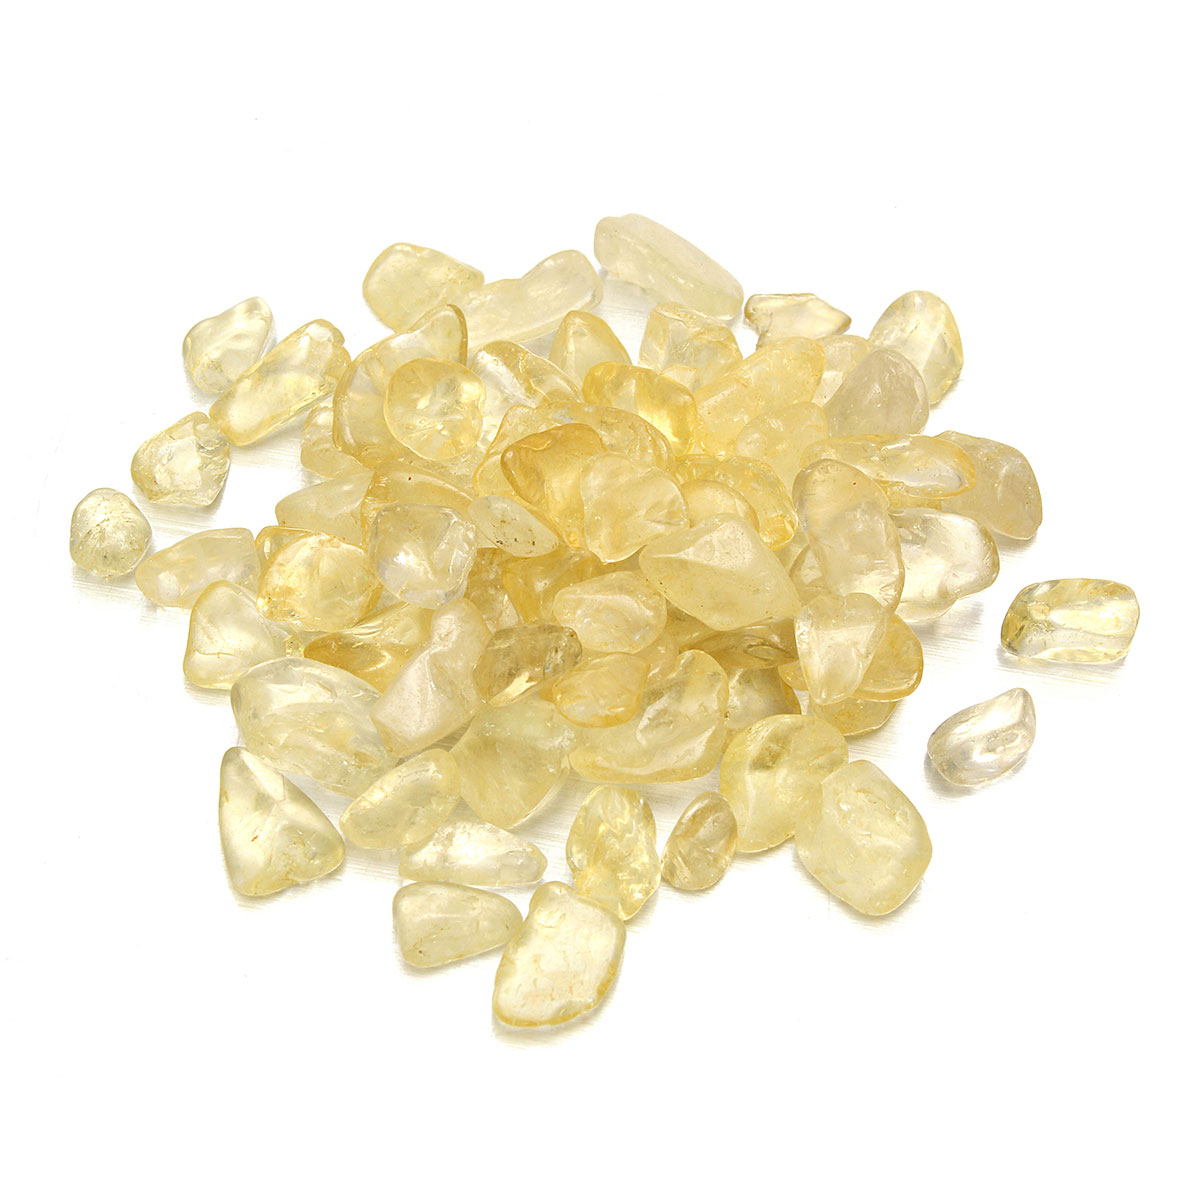 

100g Natural Yellow Citrine Polished Quartz Crystal Stone Mineral Specimen Jewelry Findings